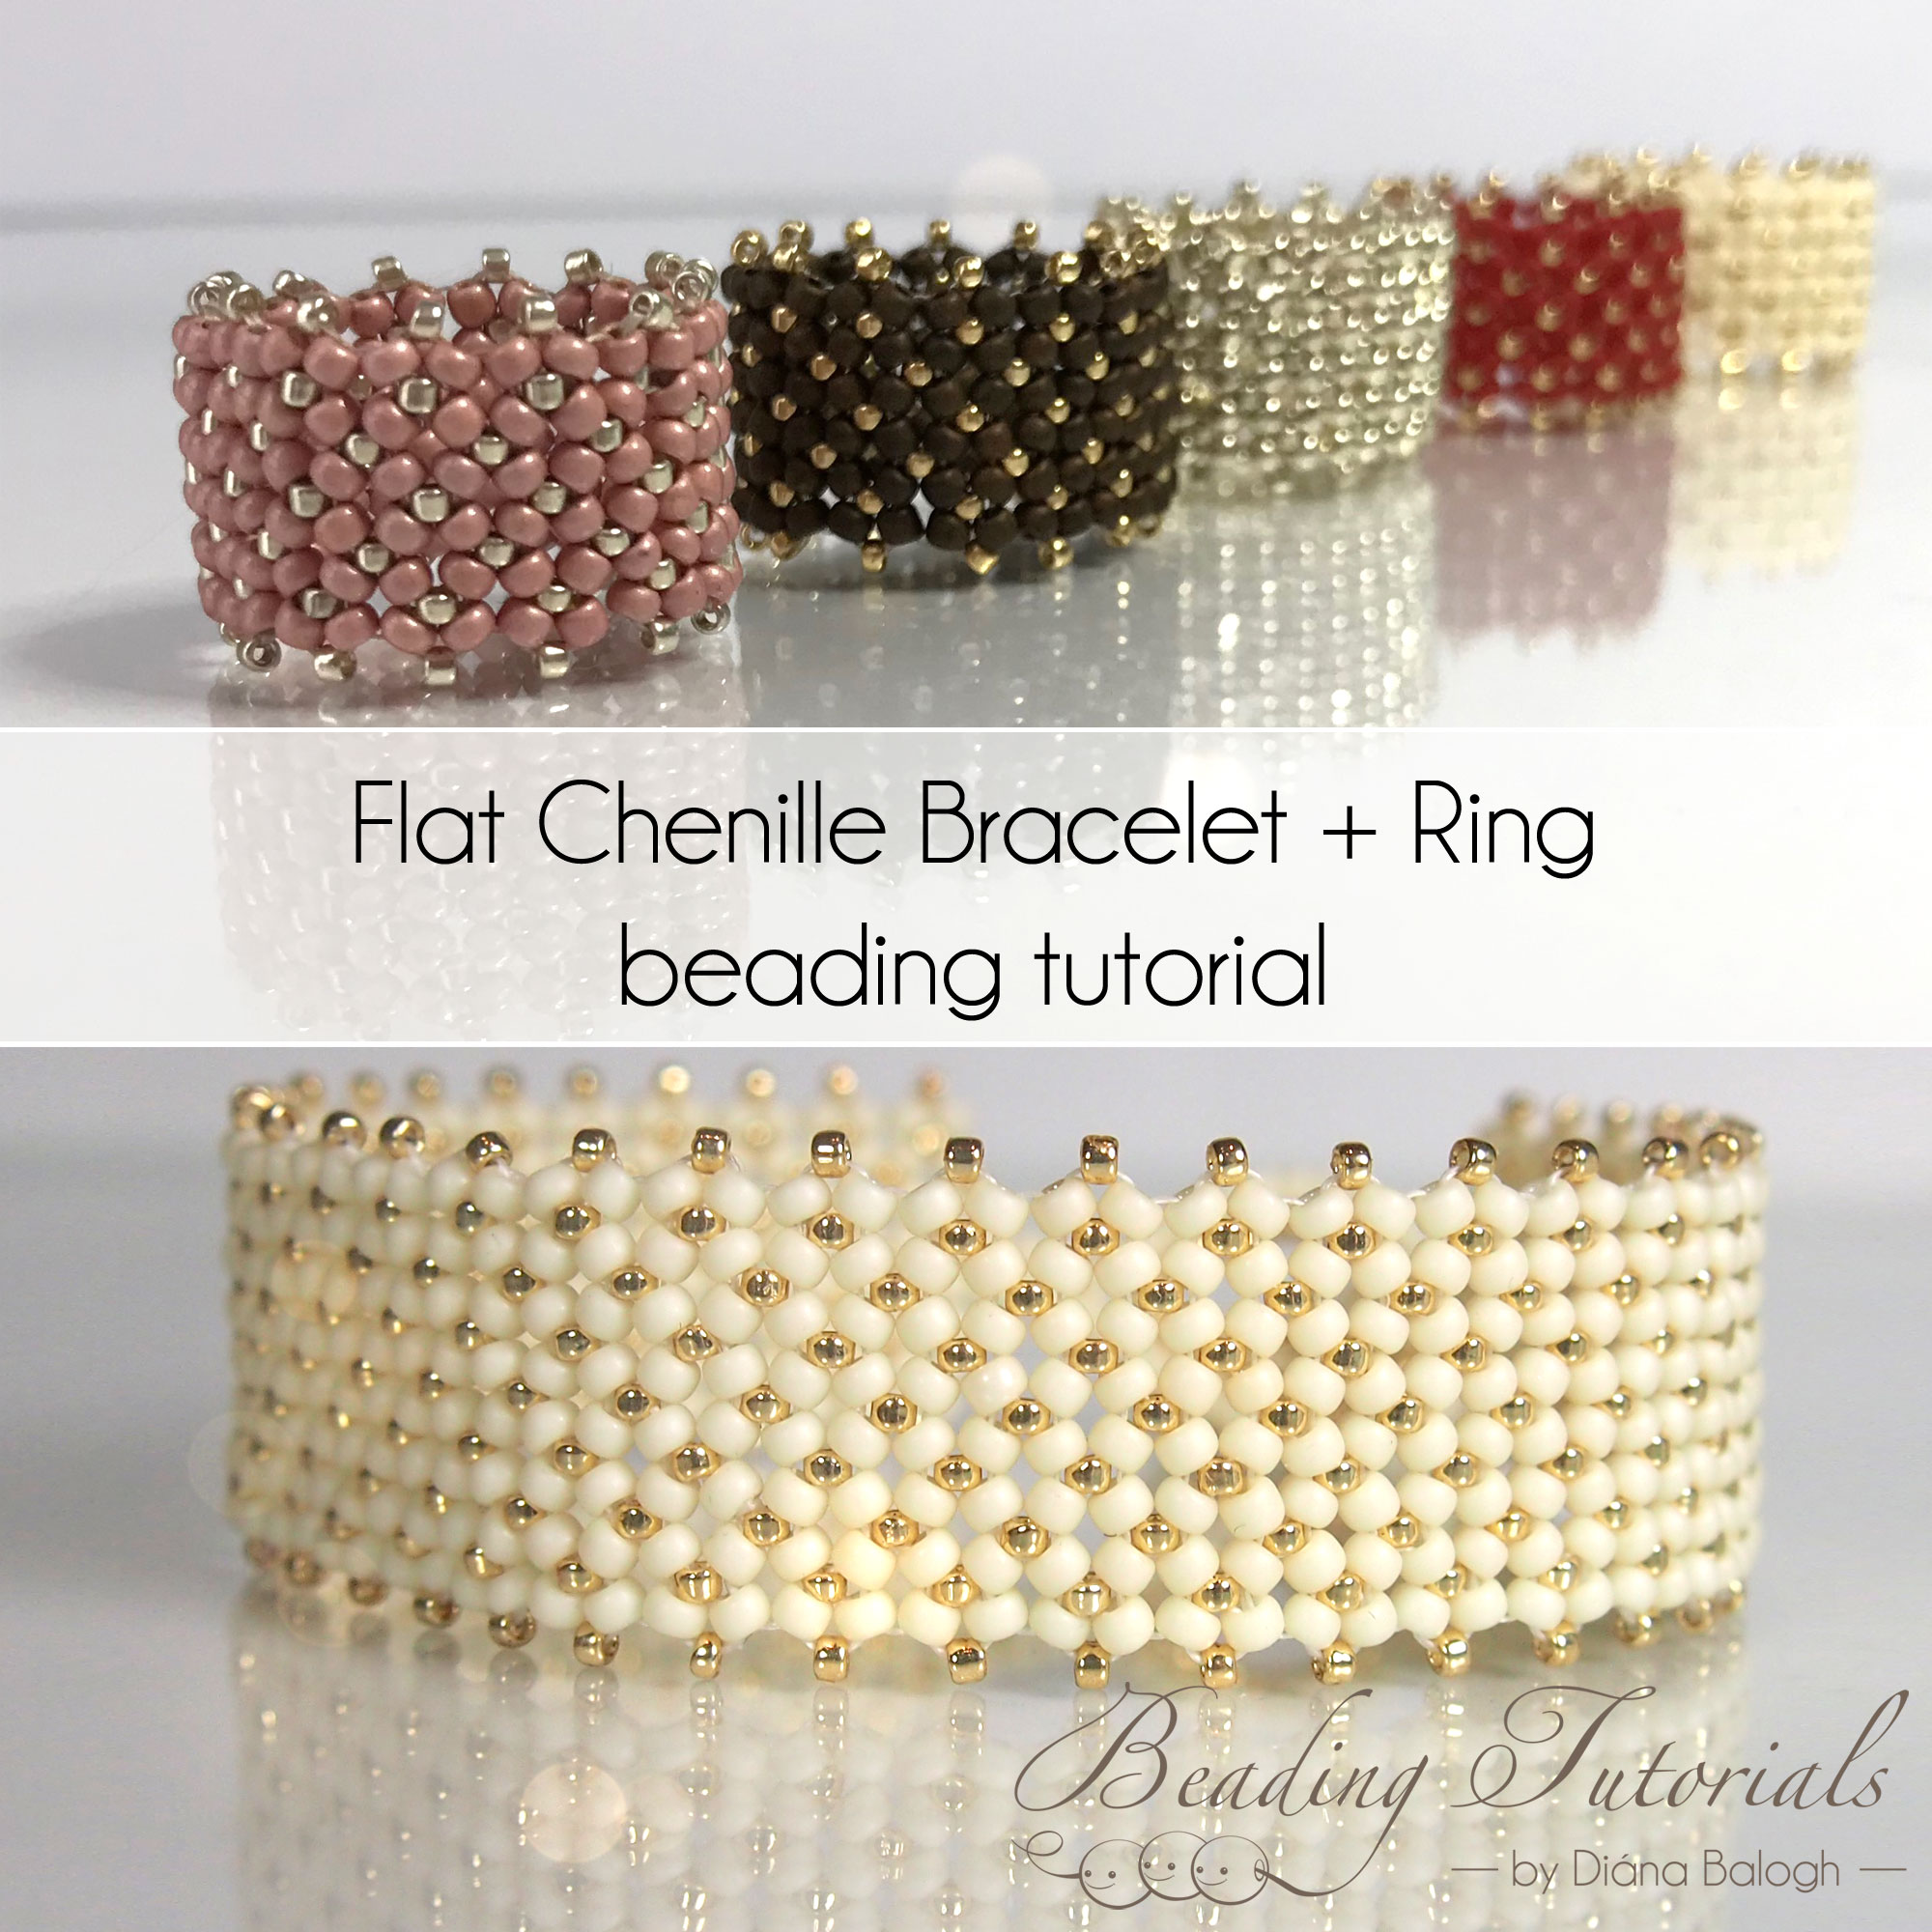 Flat Chenille Bracelet and Ring tutorial by Diána Balogh